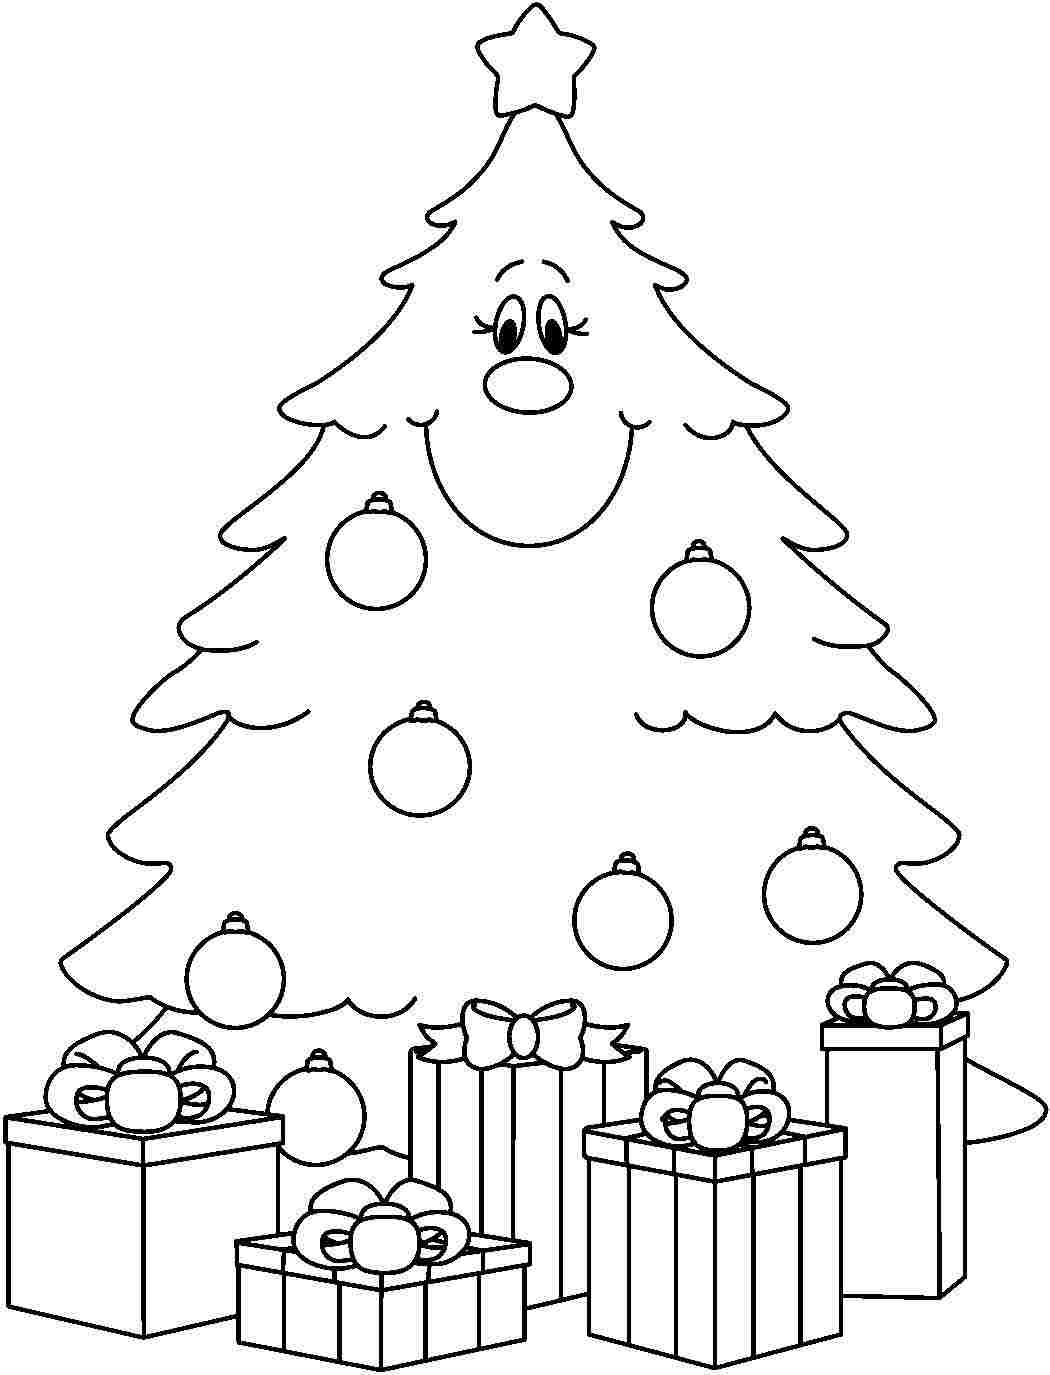 Blank Christmas Tree Coloring Sheets | Coloring Online